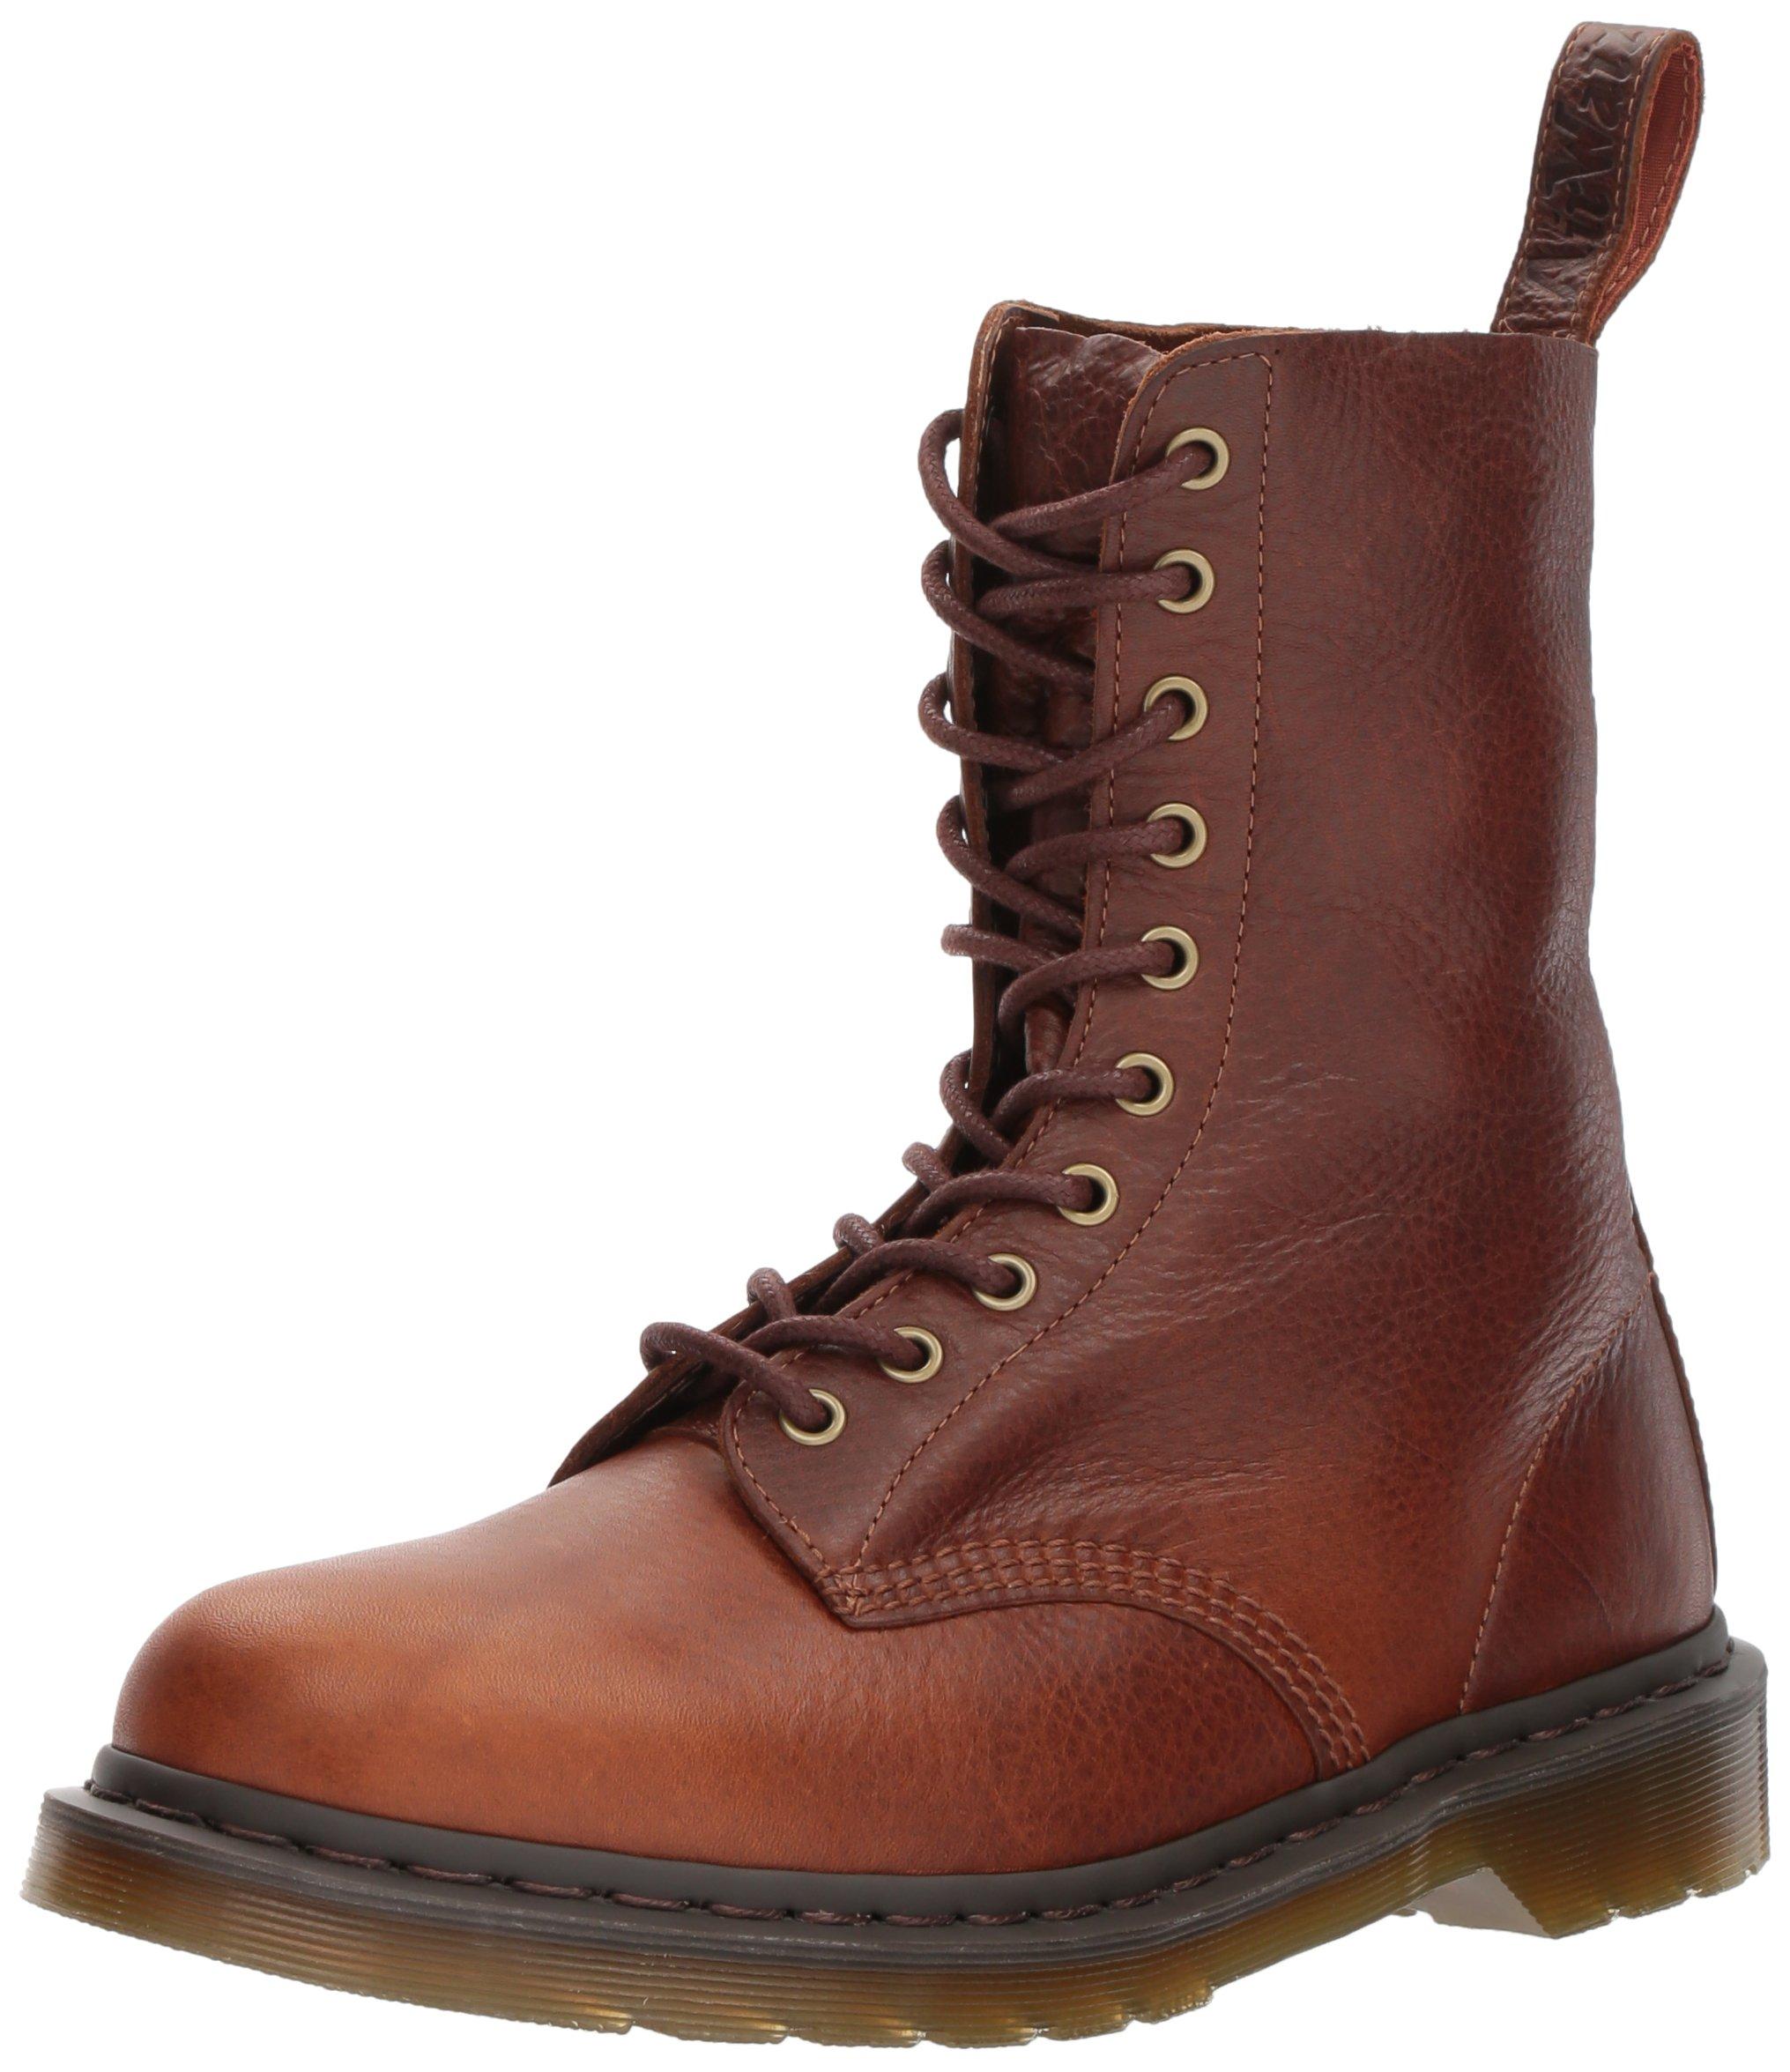 Dr. Martens 1490 Tan Harvest Leather Fashion Boot in Brown - Lyst